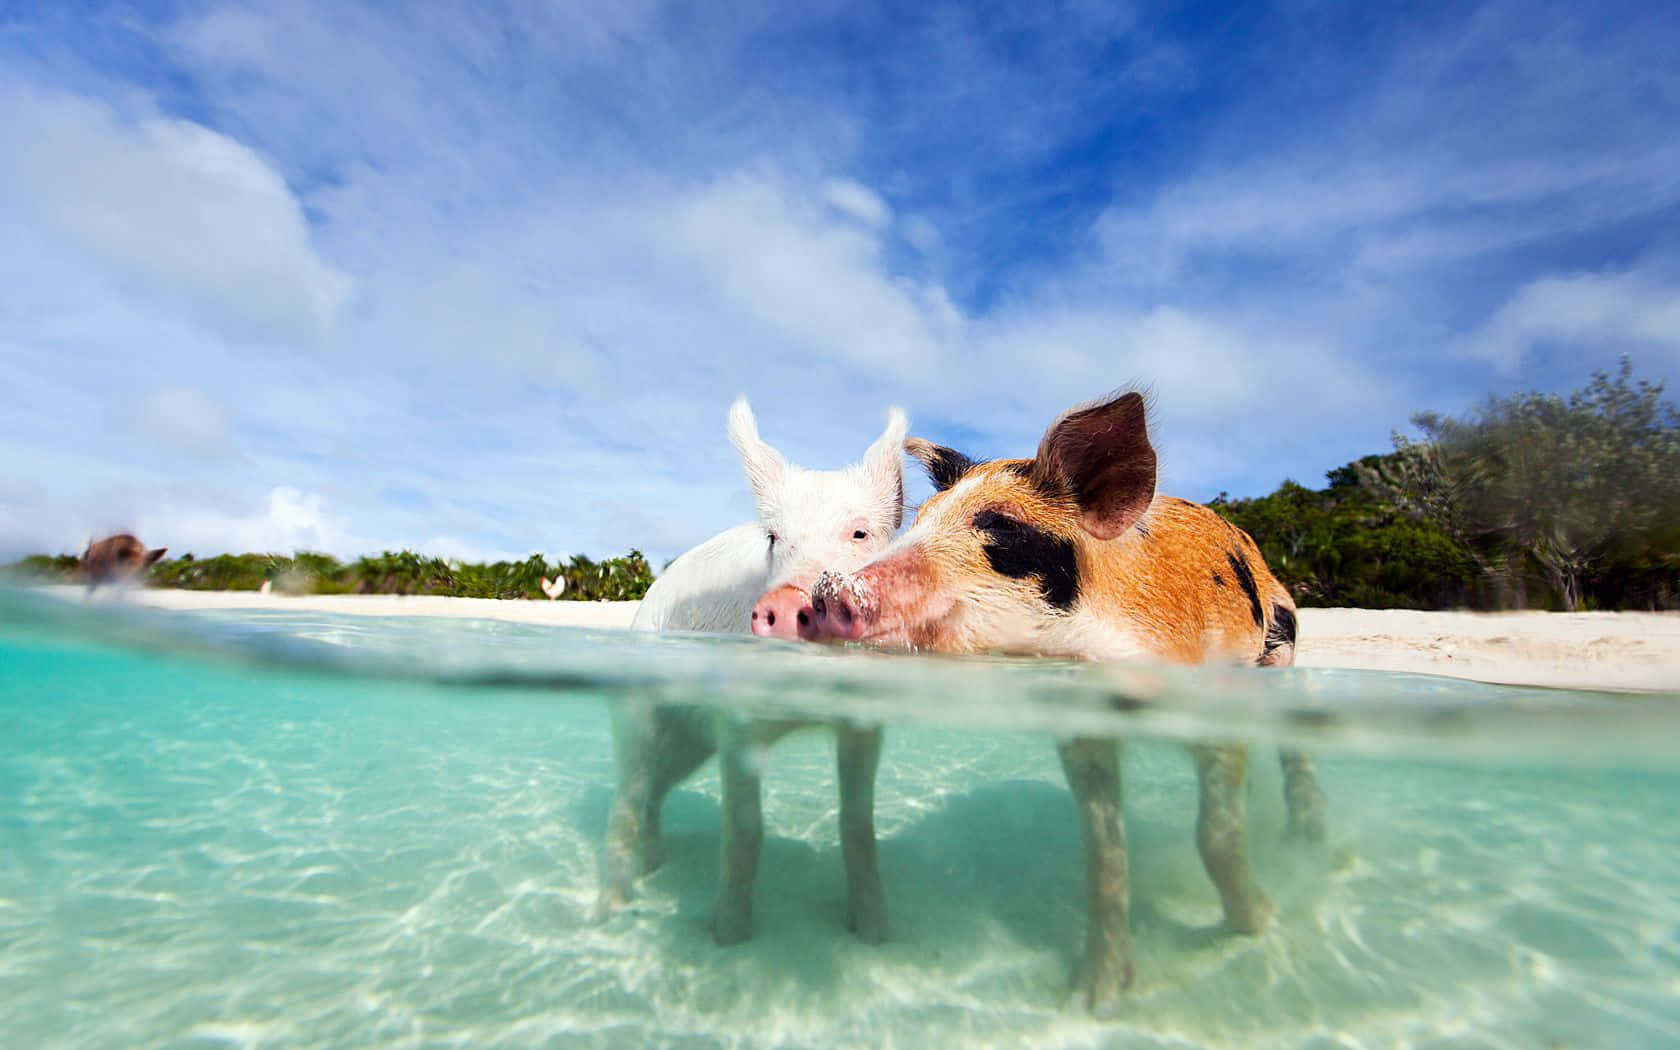 Two Pigs Against Beach Background